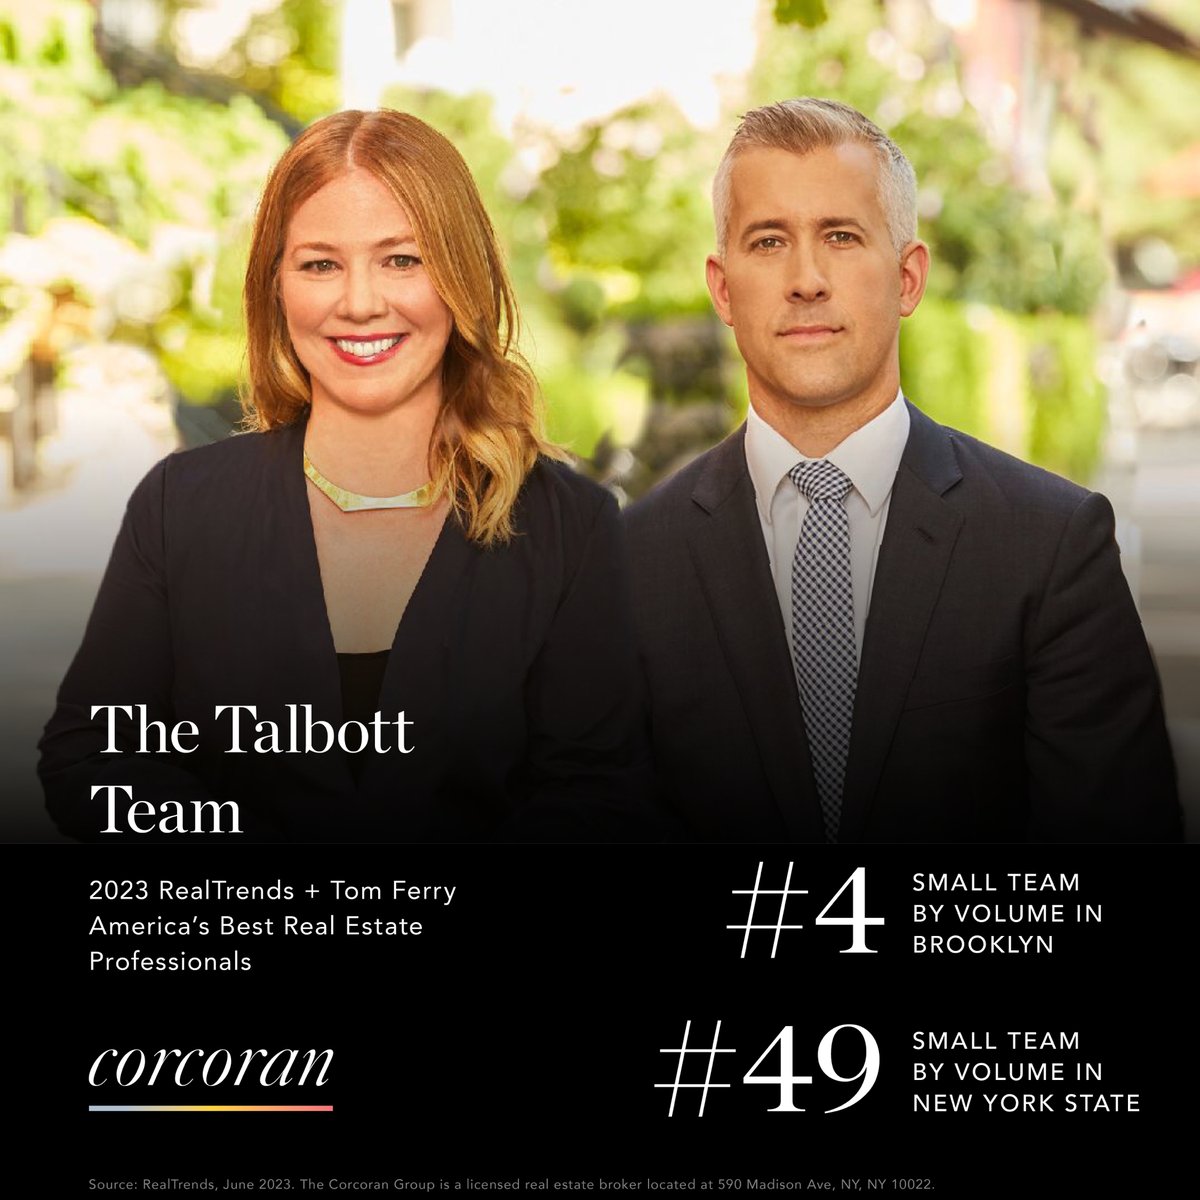 Honored to be recognized on the 2023 America’s Best Real Estate Professionals list by RealTrends + Tom Ferry! It's a testament to the dedication and hard work that goes into helping clients find their dream homes. Go team! Thank you Scott Sternberg! #thecorcorangroup #corcoran